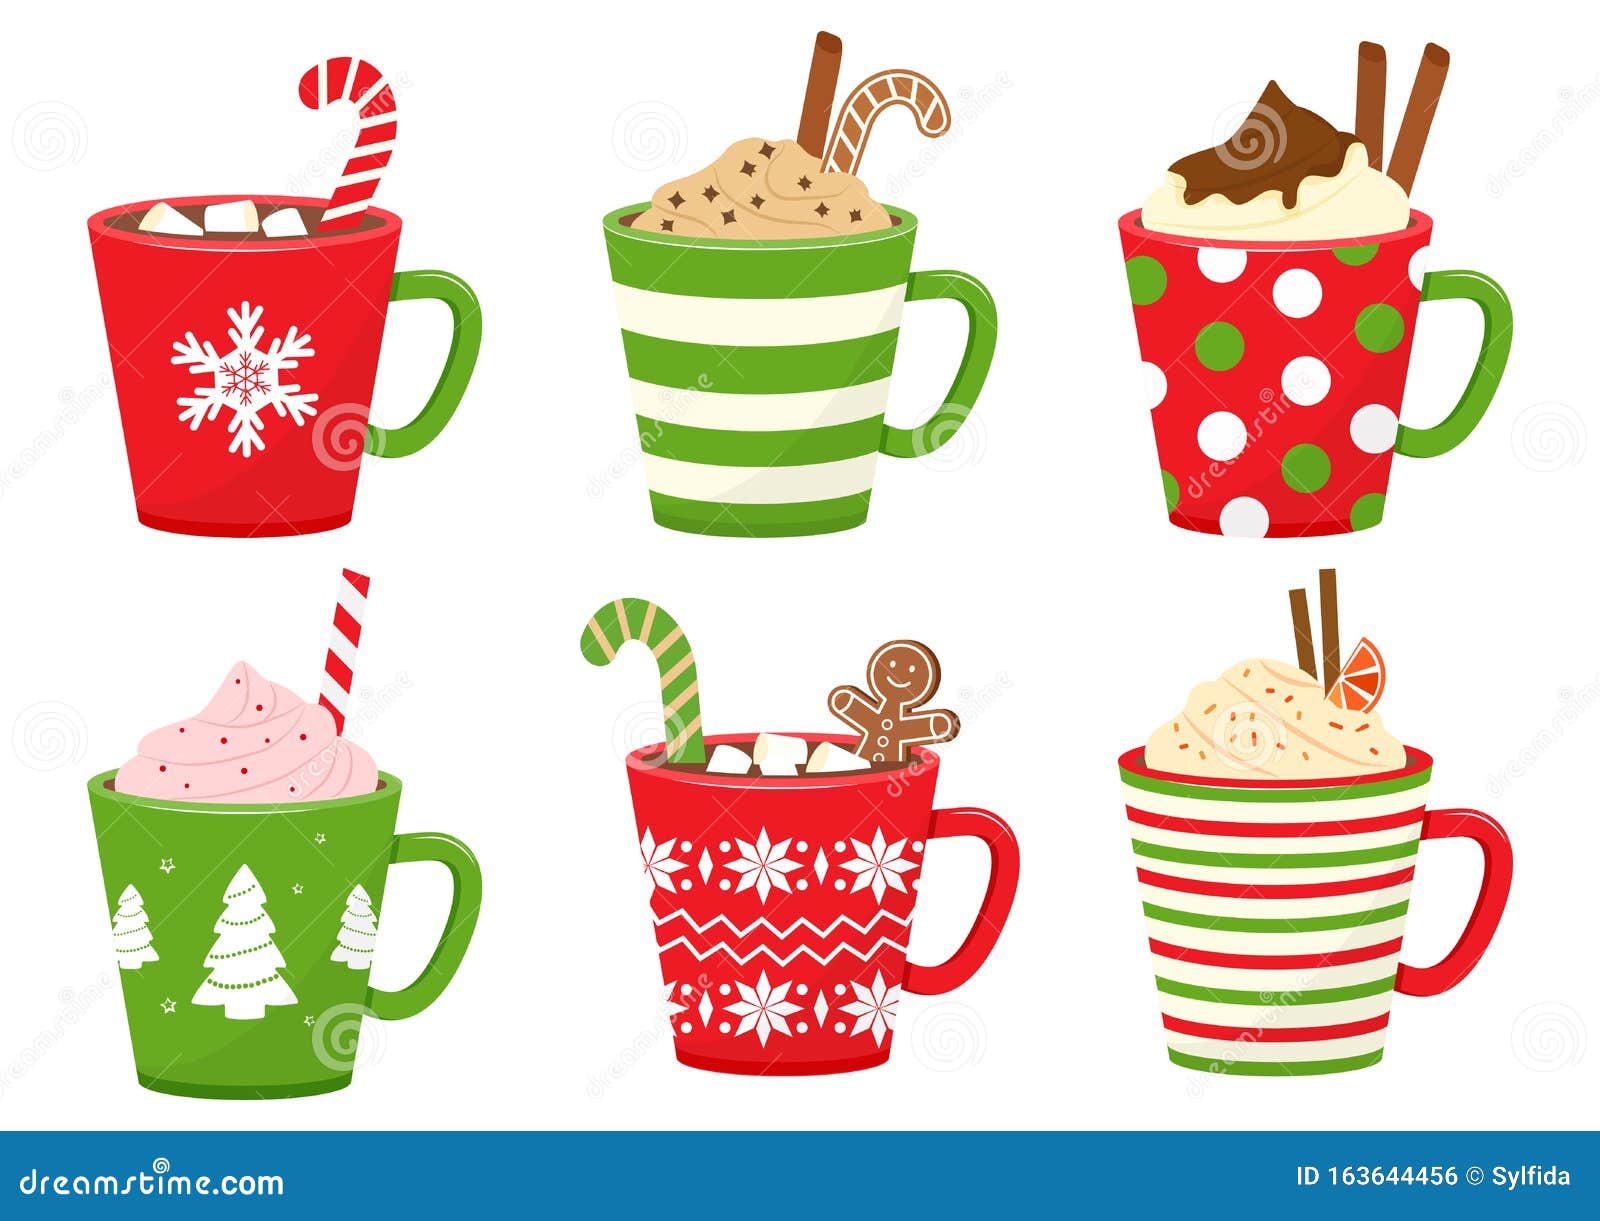 https://thumbs.dreamstime.com/z/winter-holiday-cups-drinks-mugs-hot-chocolate-cocoa-coffee-cream-gingerbread-man-cookie-candy-cane-cinnamon-sticks-163644456.jpg